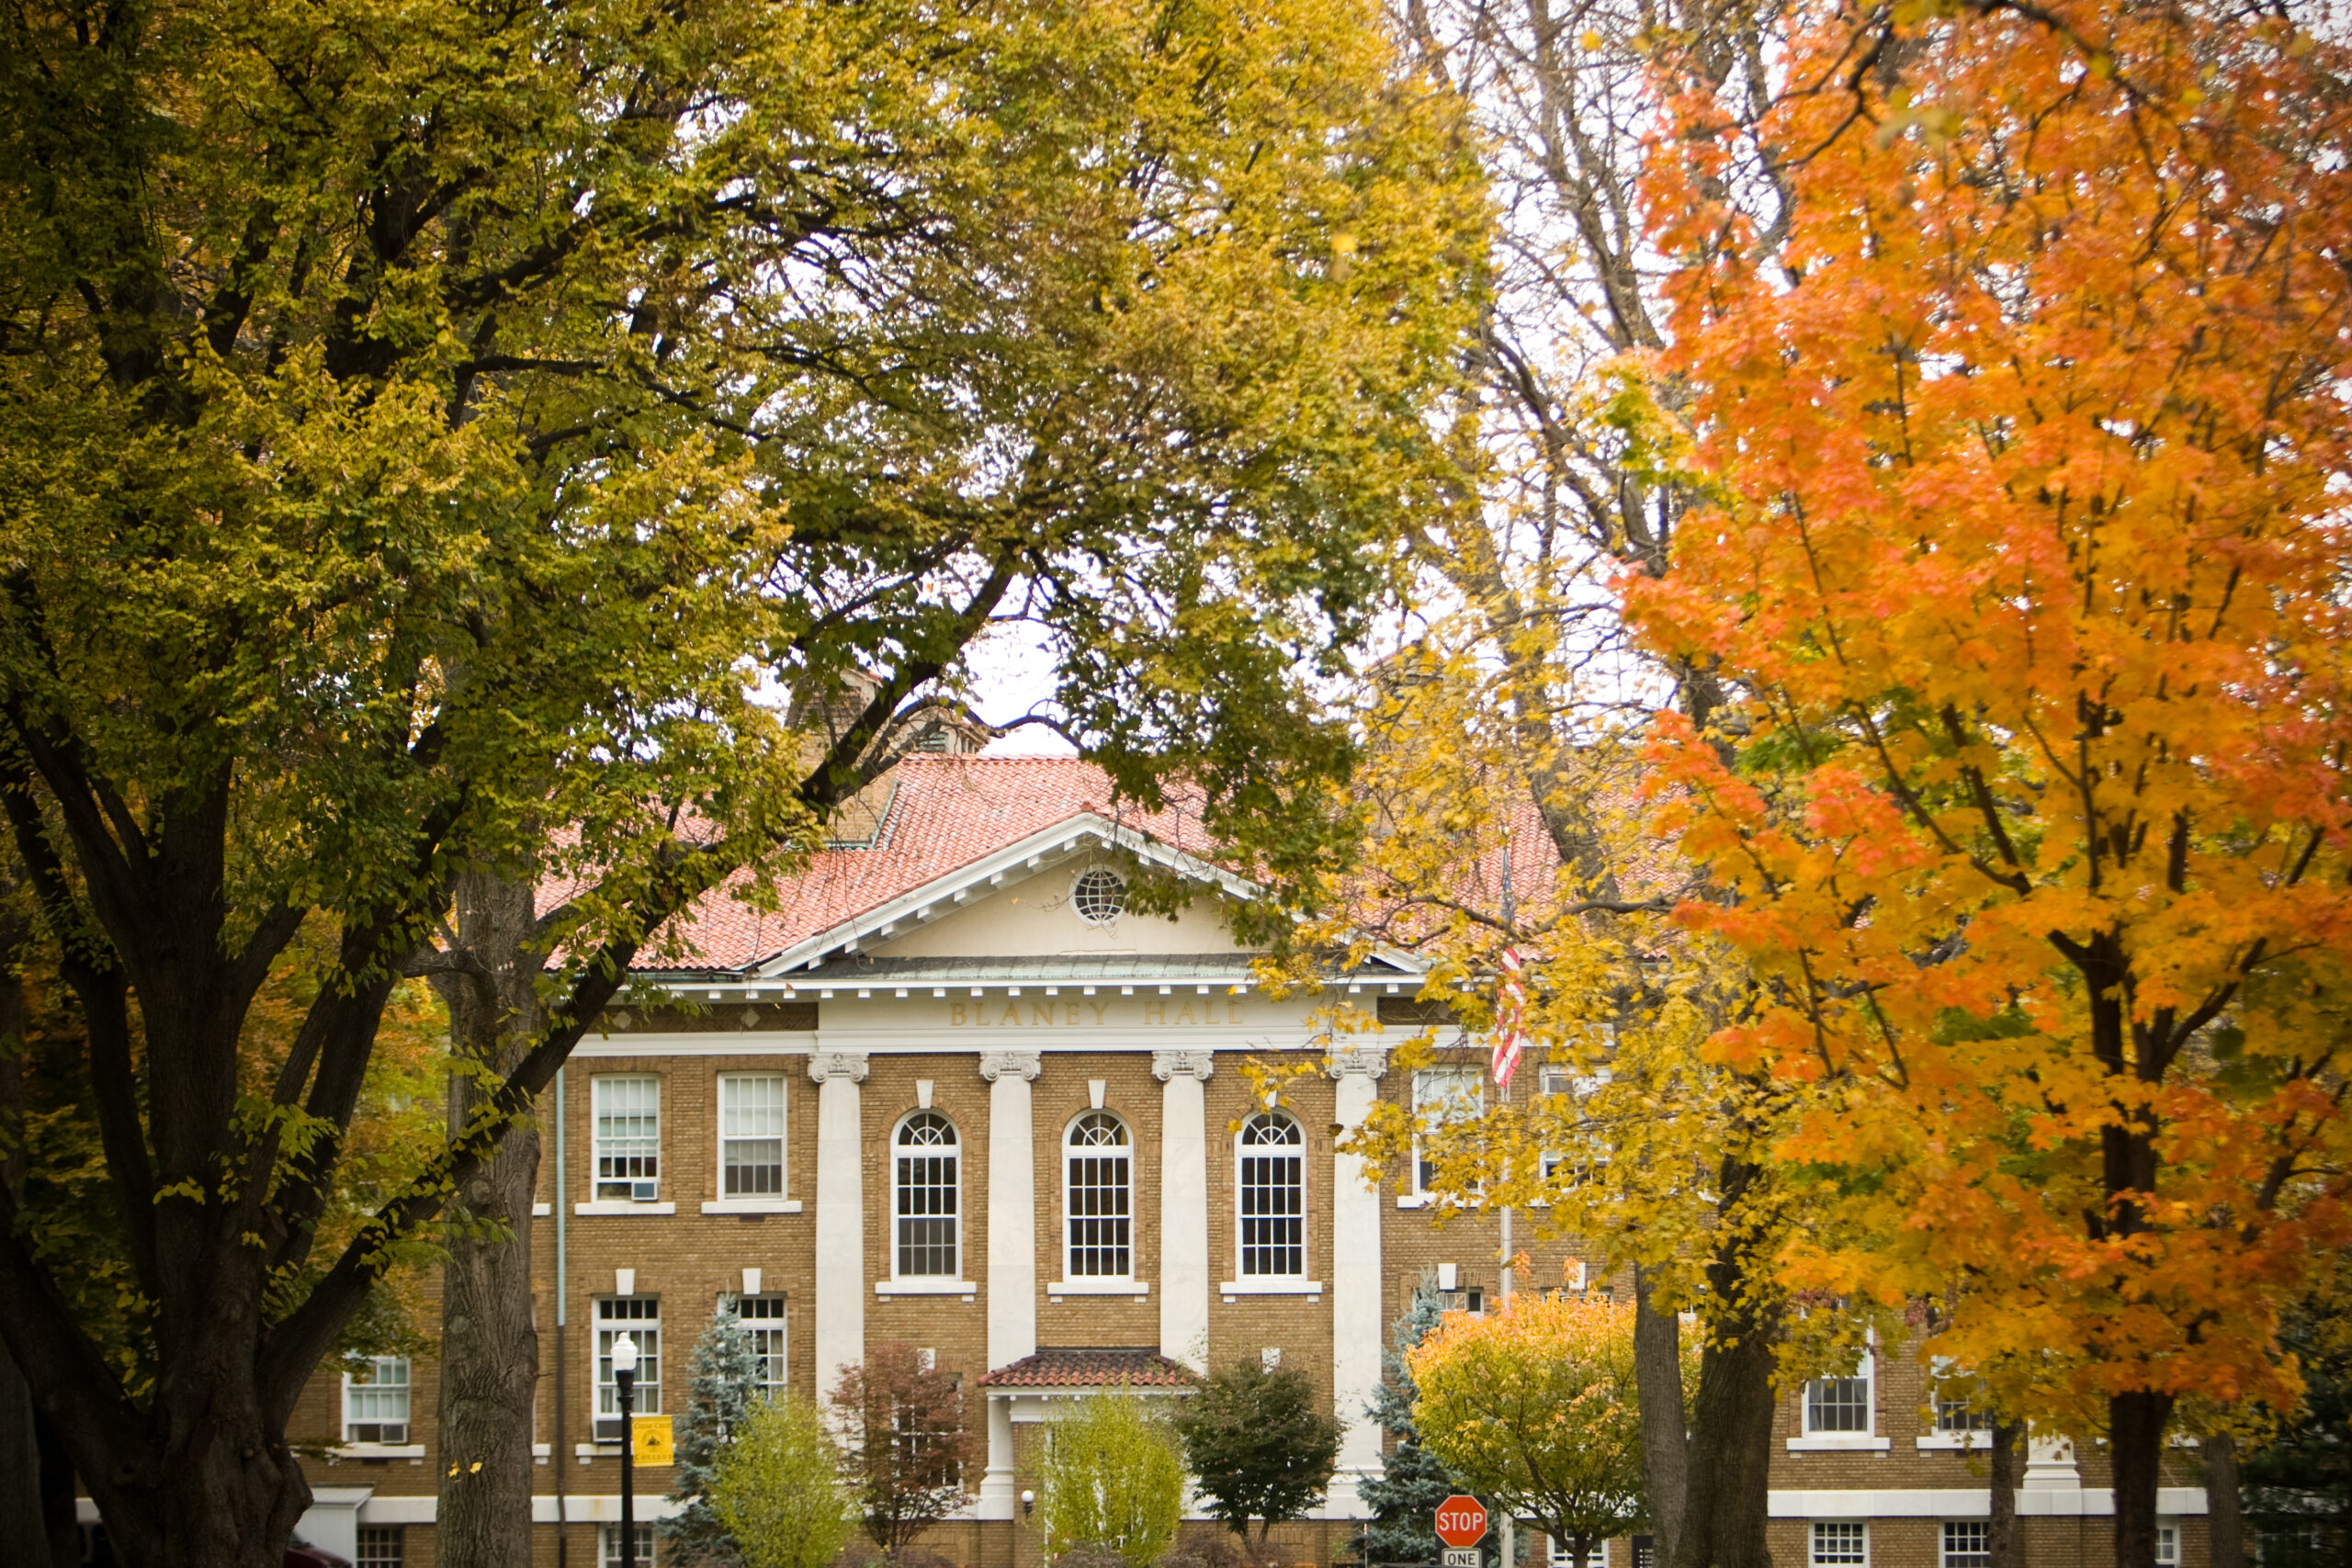 Photo shows Blaney Hall in the fall surrounded by trees with leaves turning orange and yellow